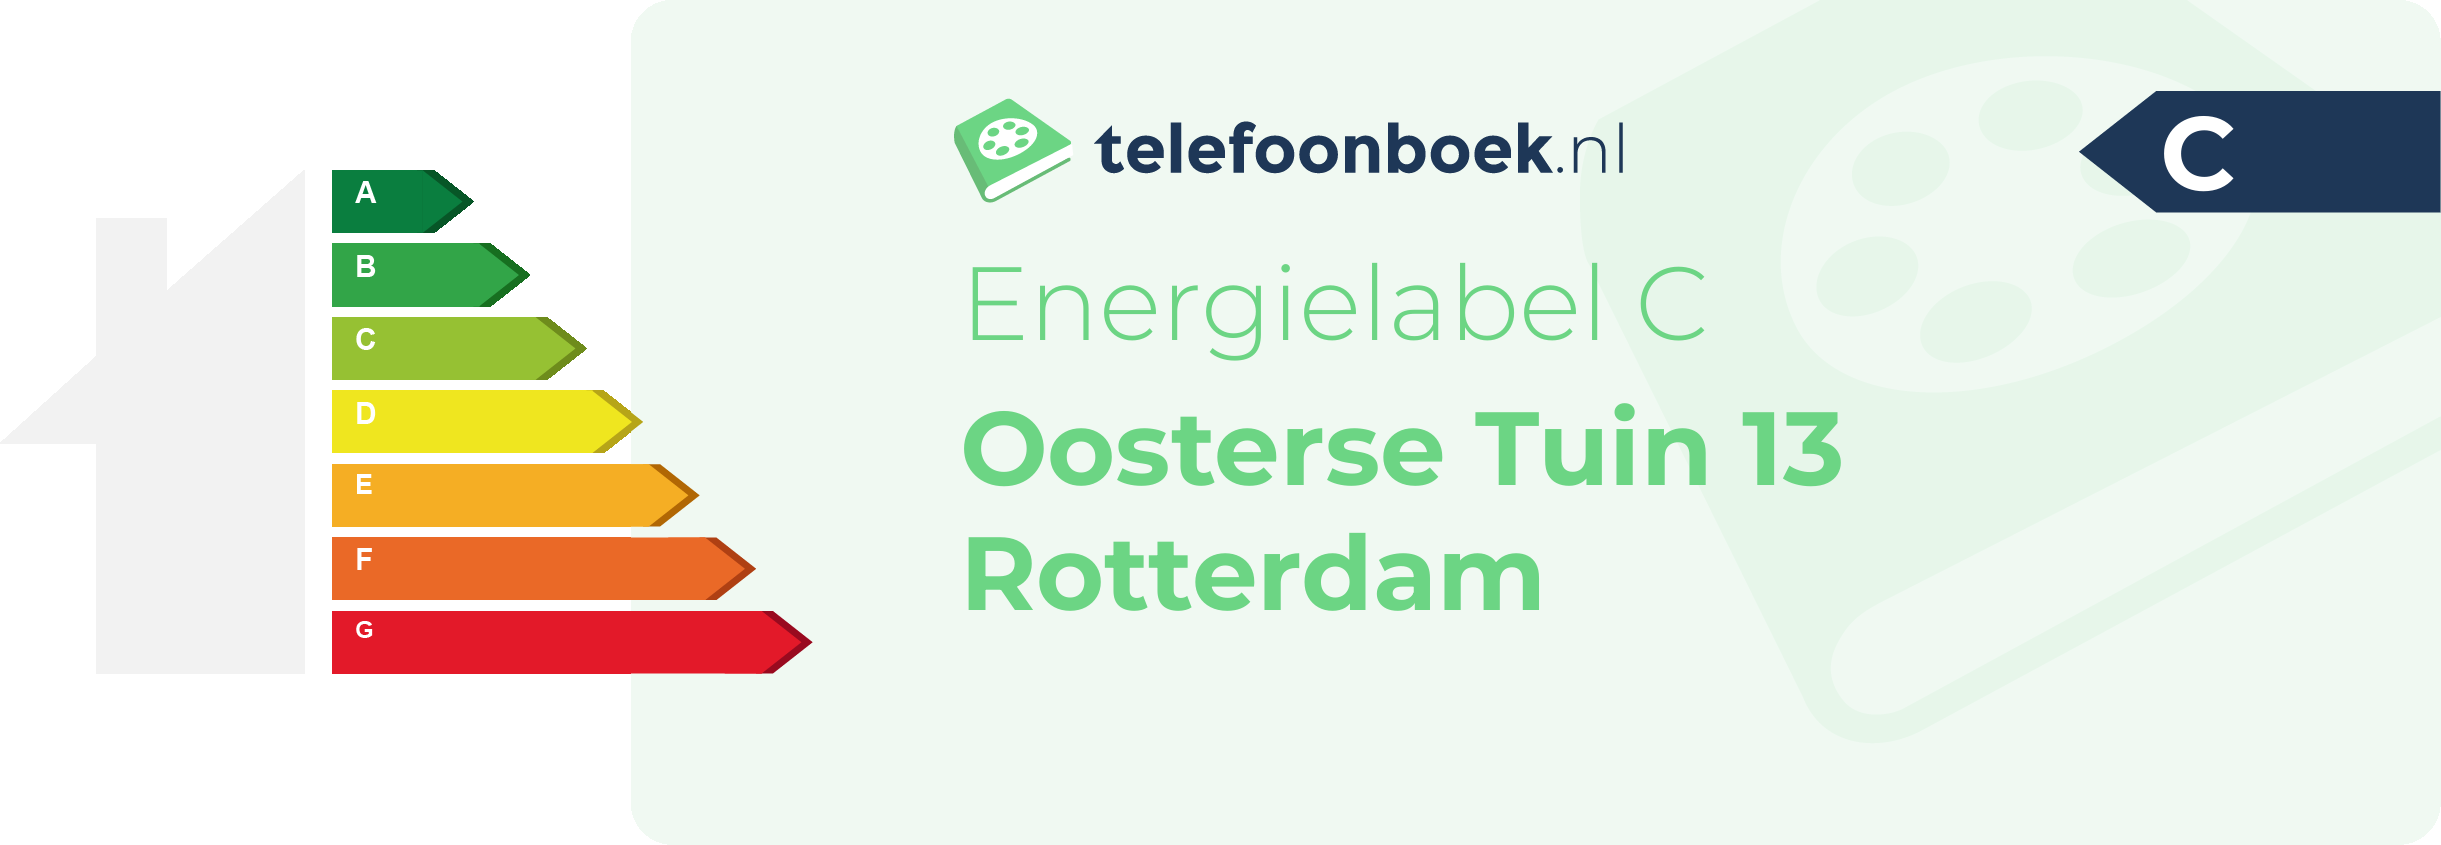 Energielabel Oosterse Tuin 13 Rotterdam